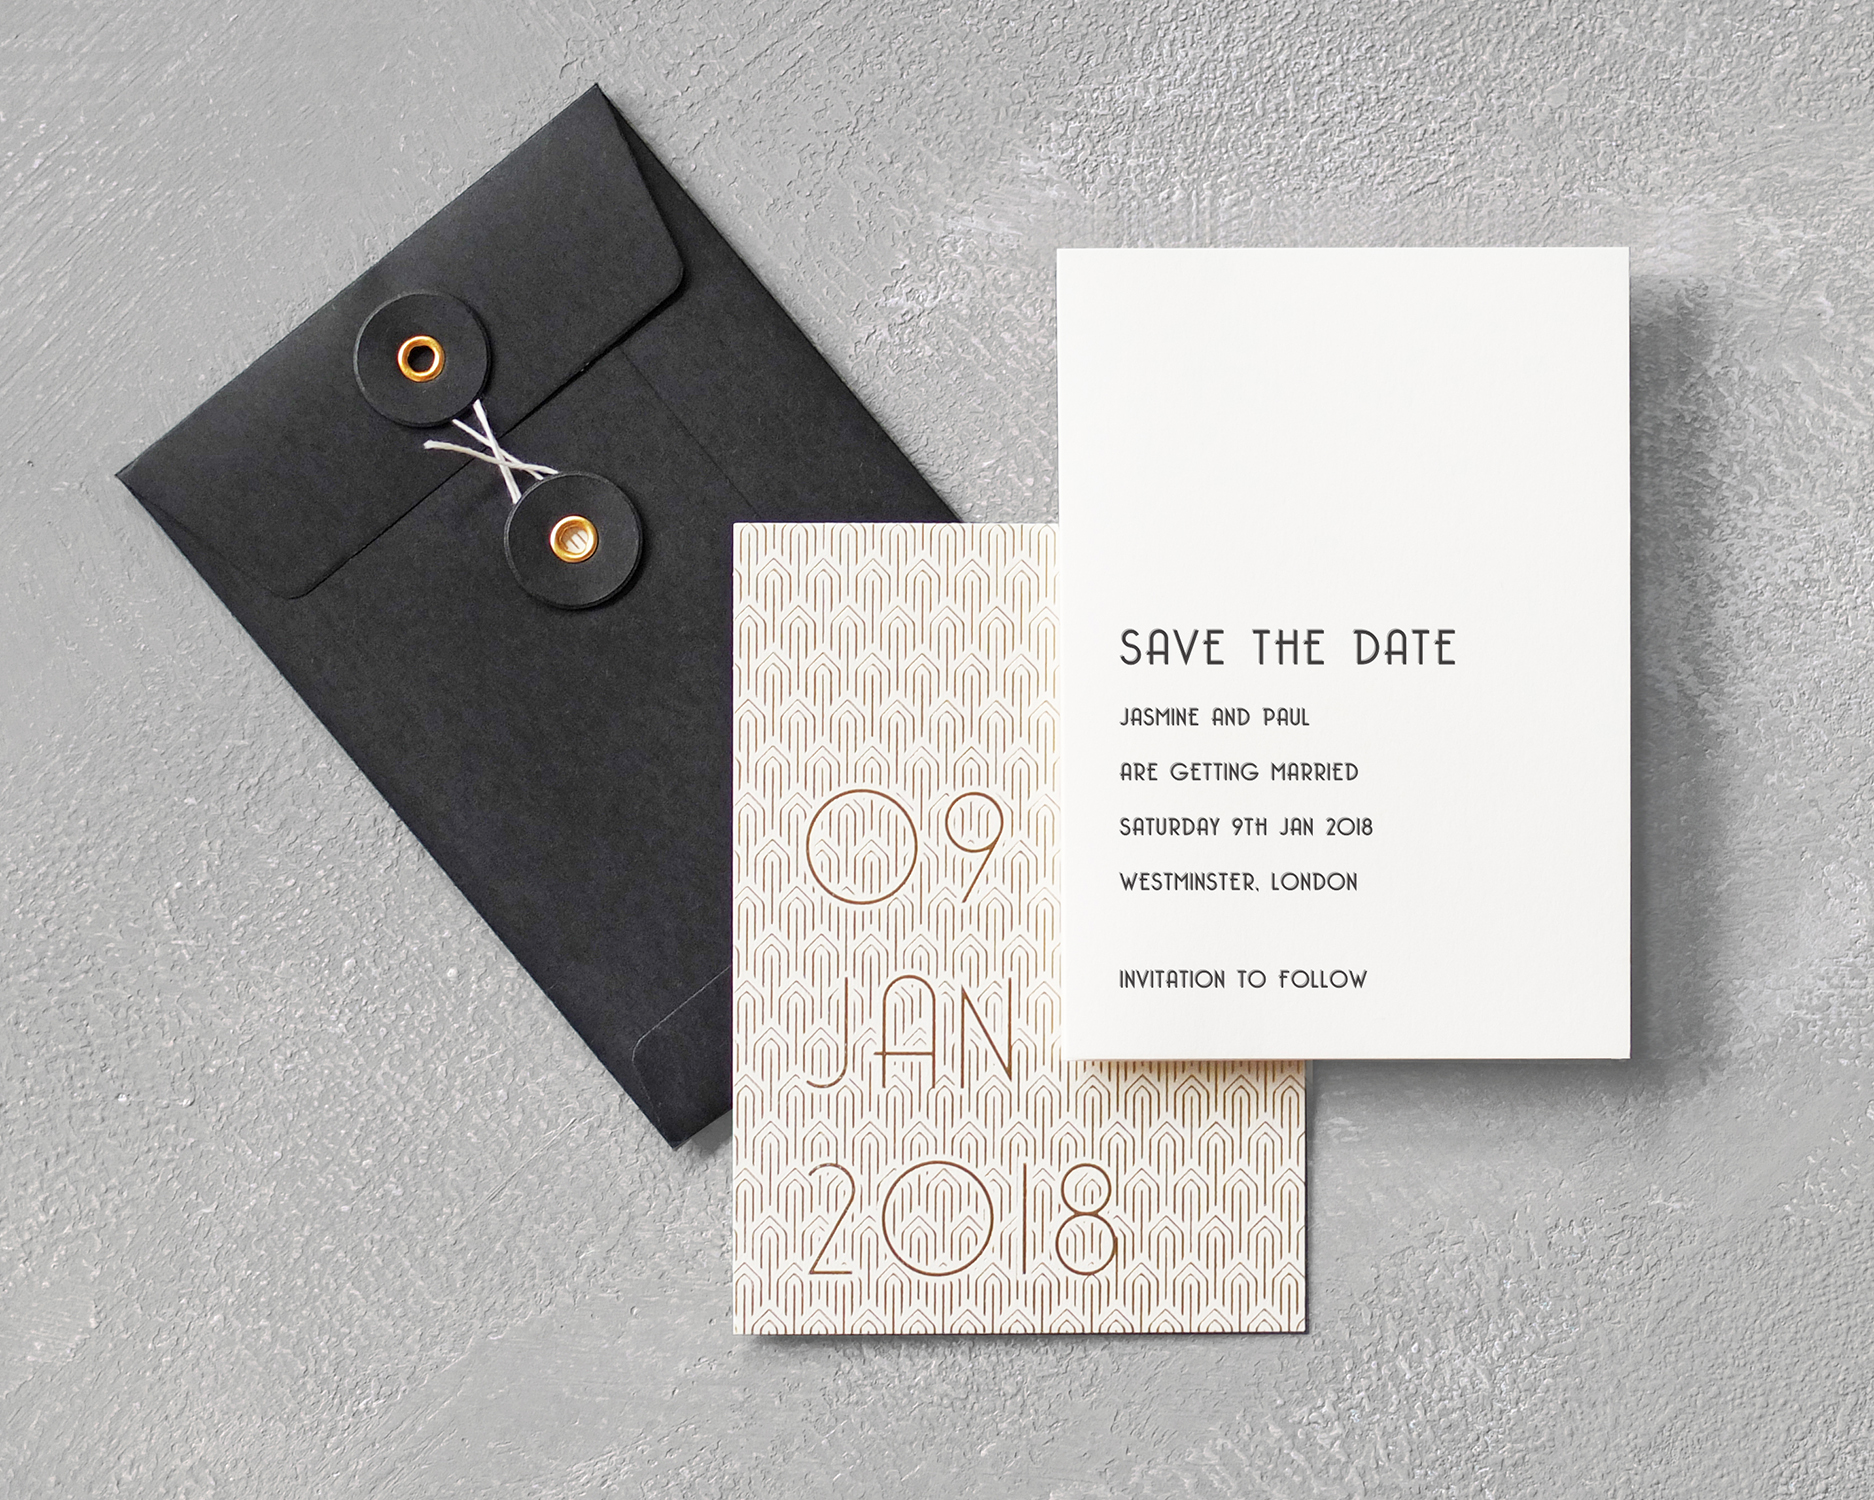 Gold Foil Save the Date